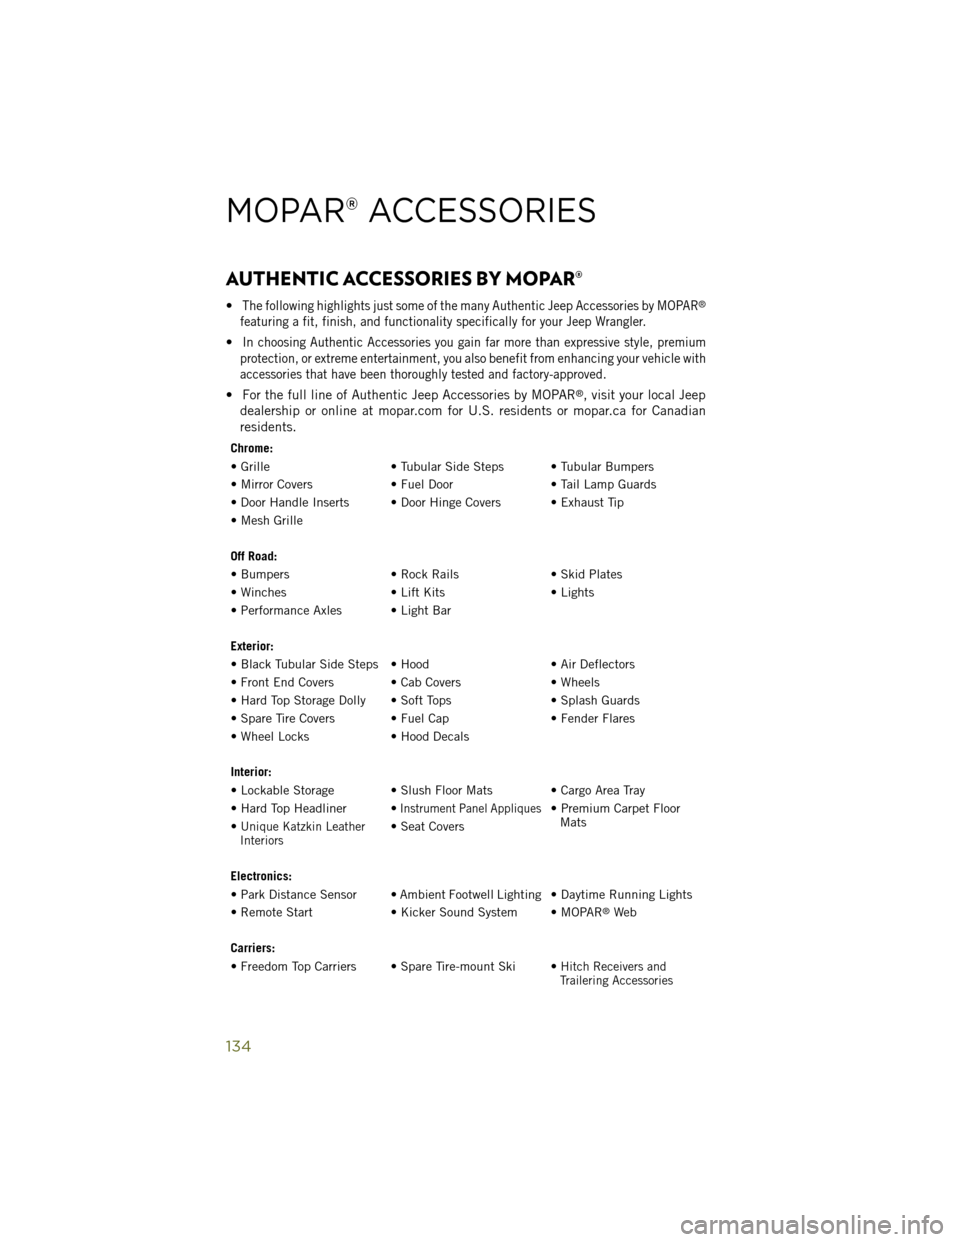 JEEP WRANGLER 2014 JK / 3.G User Guide AUTHENTIC ACCESSORIES BY MOPAR®
•The following highlights just some of the many Authentic Jeep Accessories by MOPAR®
featuring a fit, finish, and functionality specifically for your Jeep Wrangler.